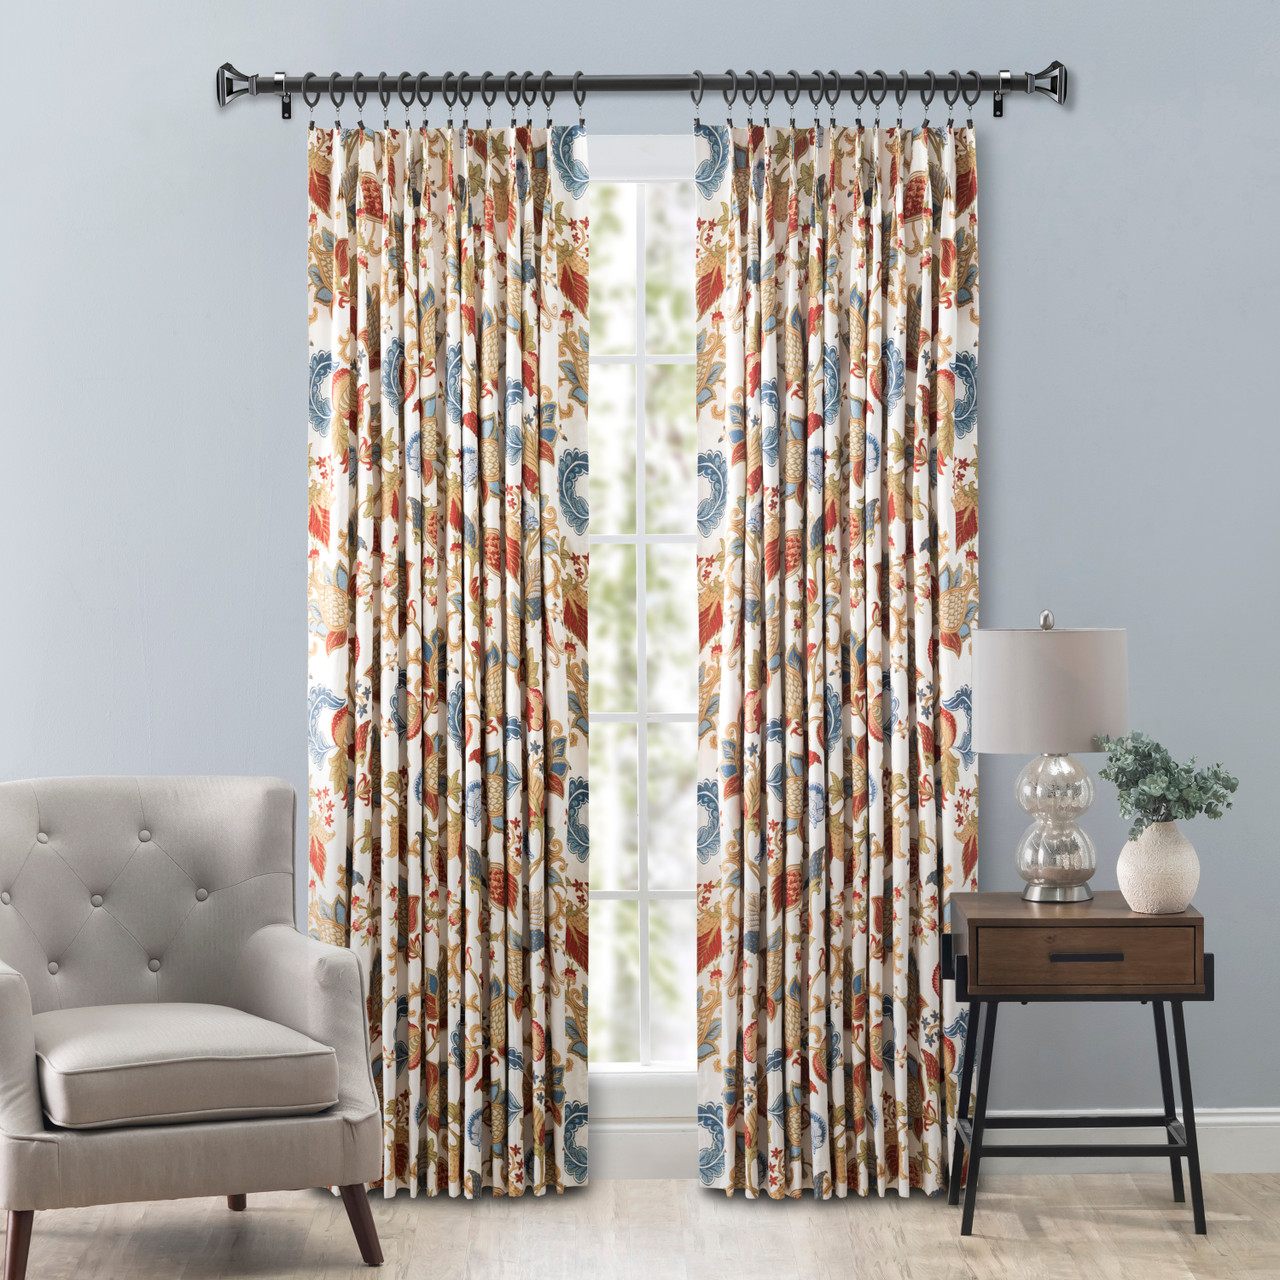 CAMBRIDGE - PAIR OF PINCH PLEATED DRAPES